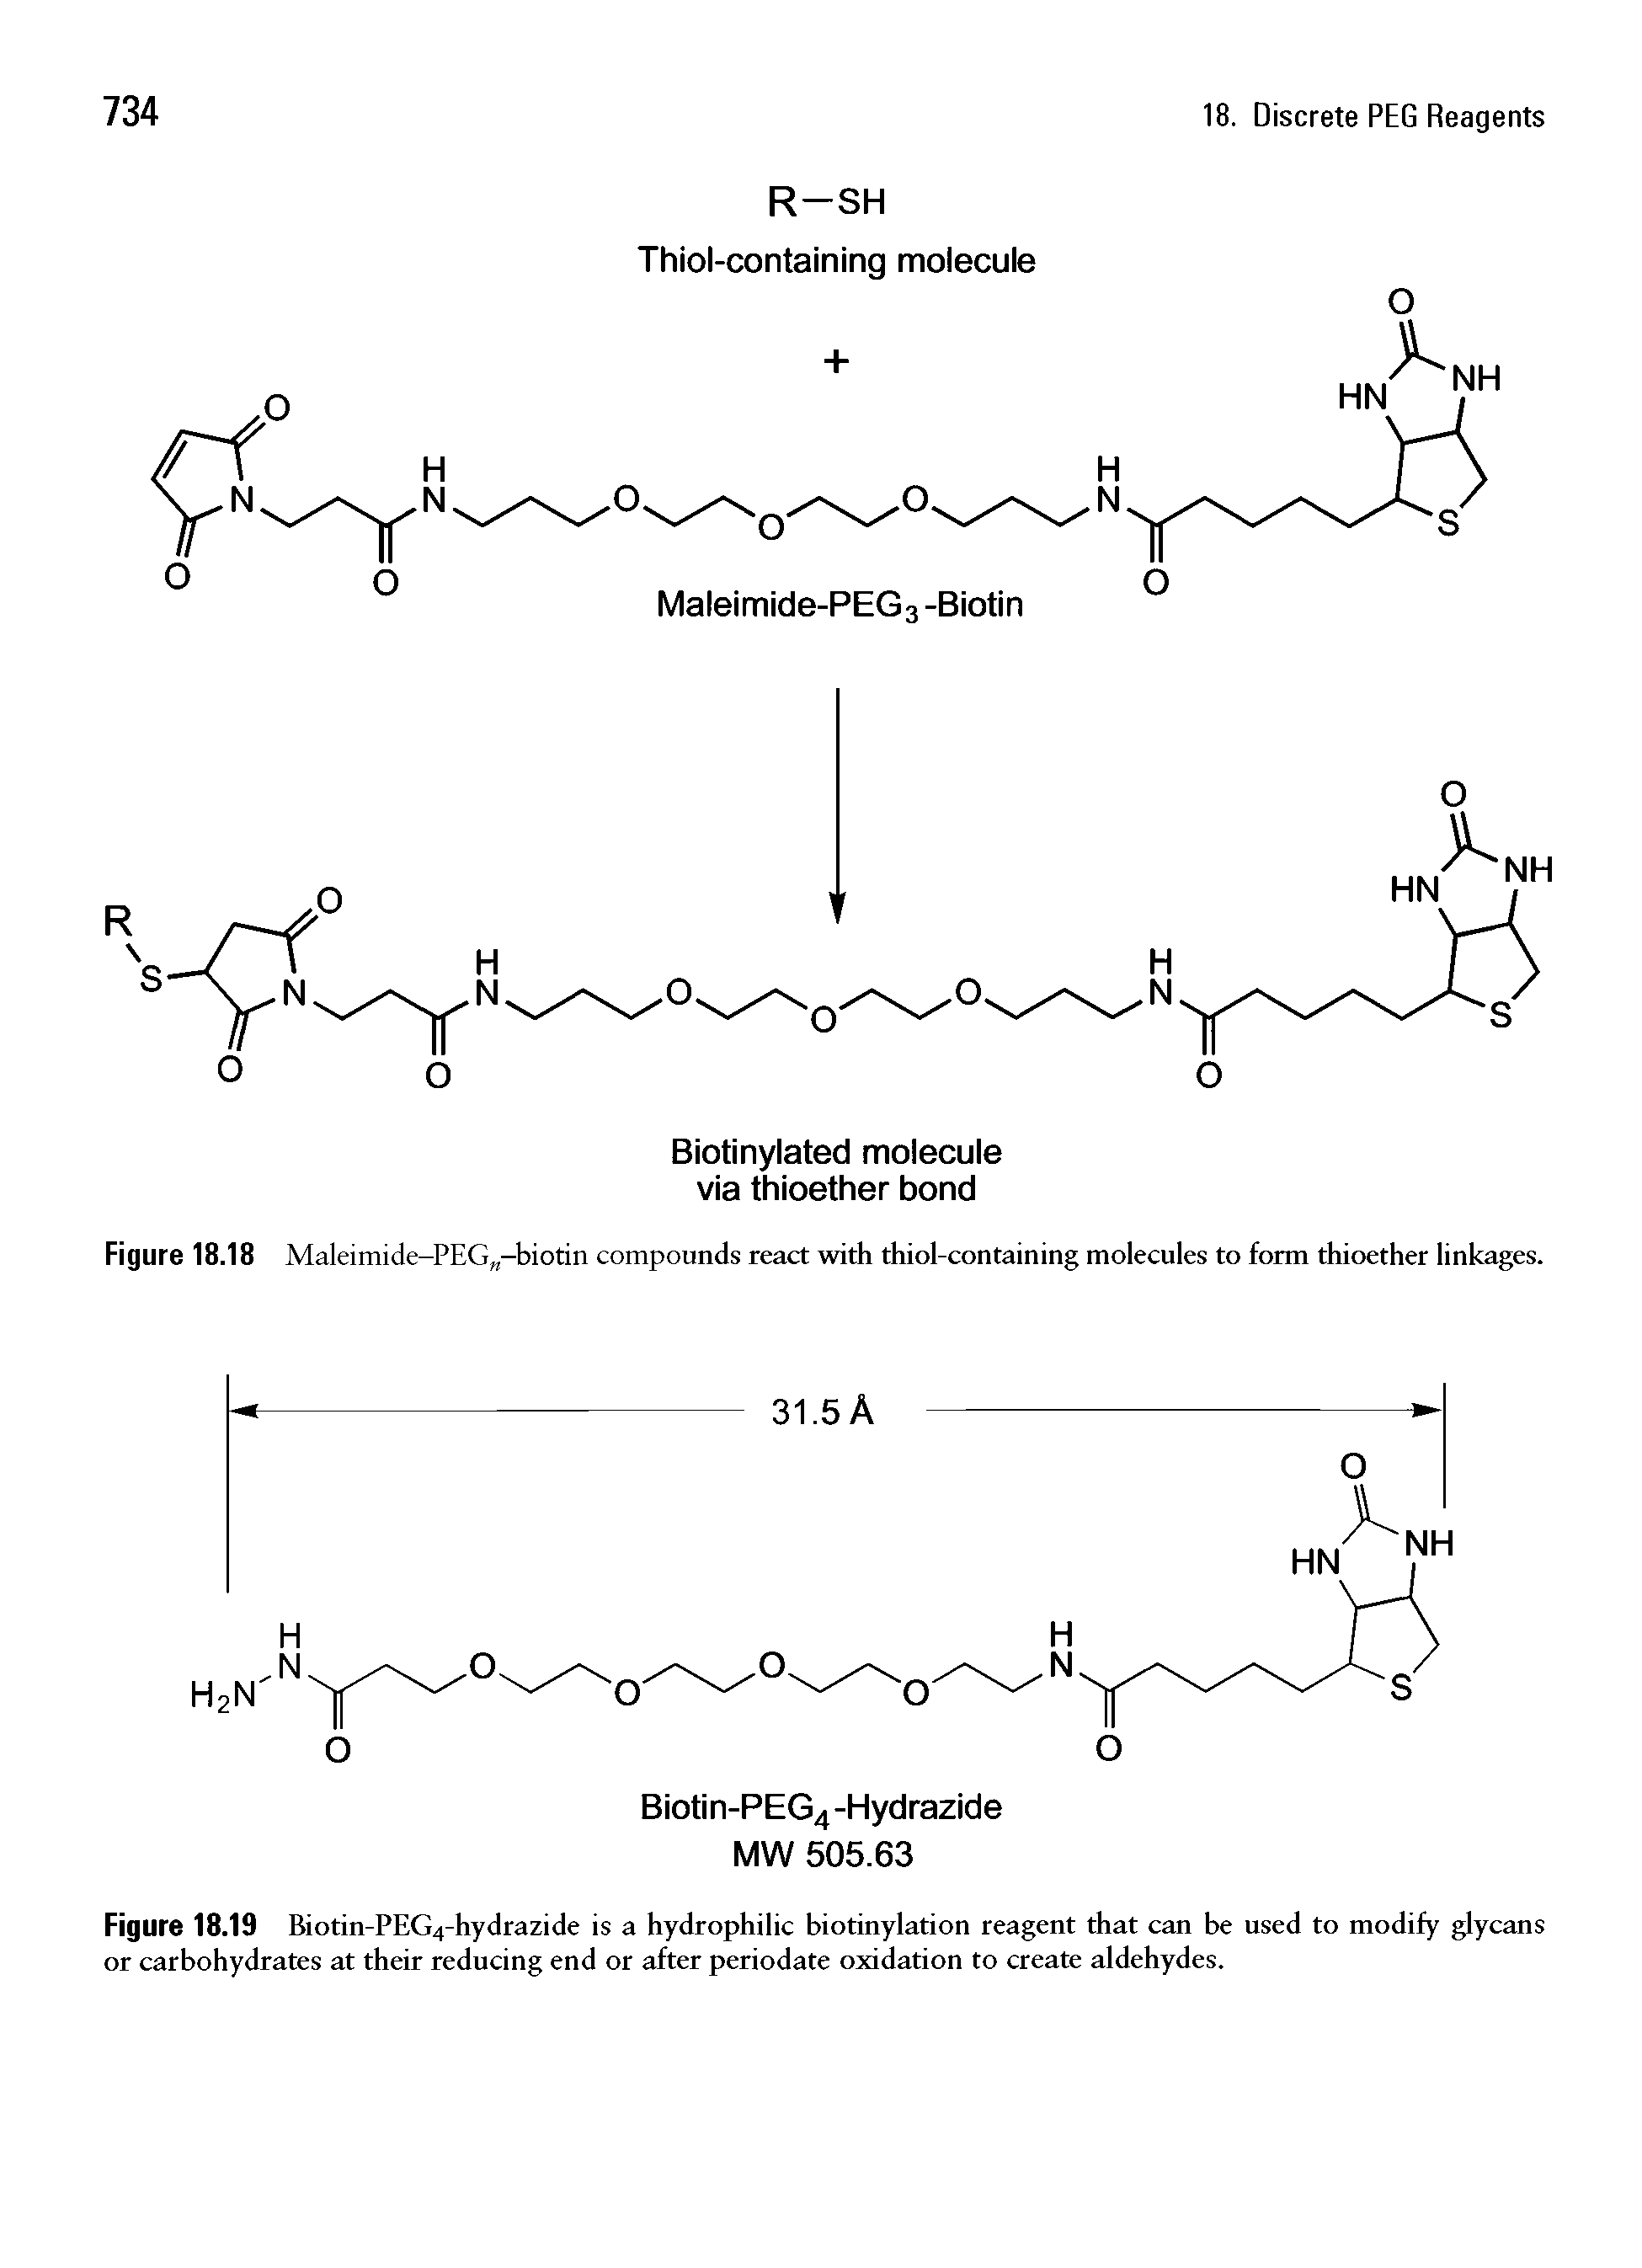 Figure 18.19 Biotin-PEG4-hydrazide is a hydrophilic biotinylation reagent that can be used to modify glycans or carbohydrates at their reducing end or after periodate oxidation to create aldehydes.